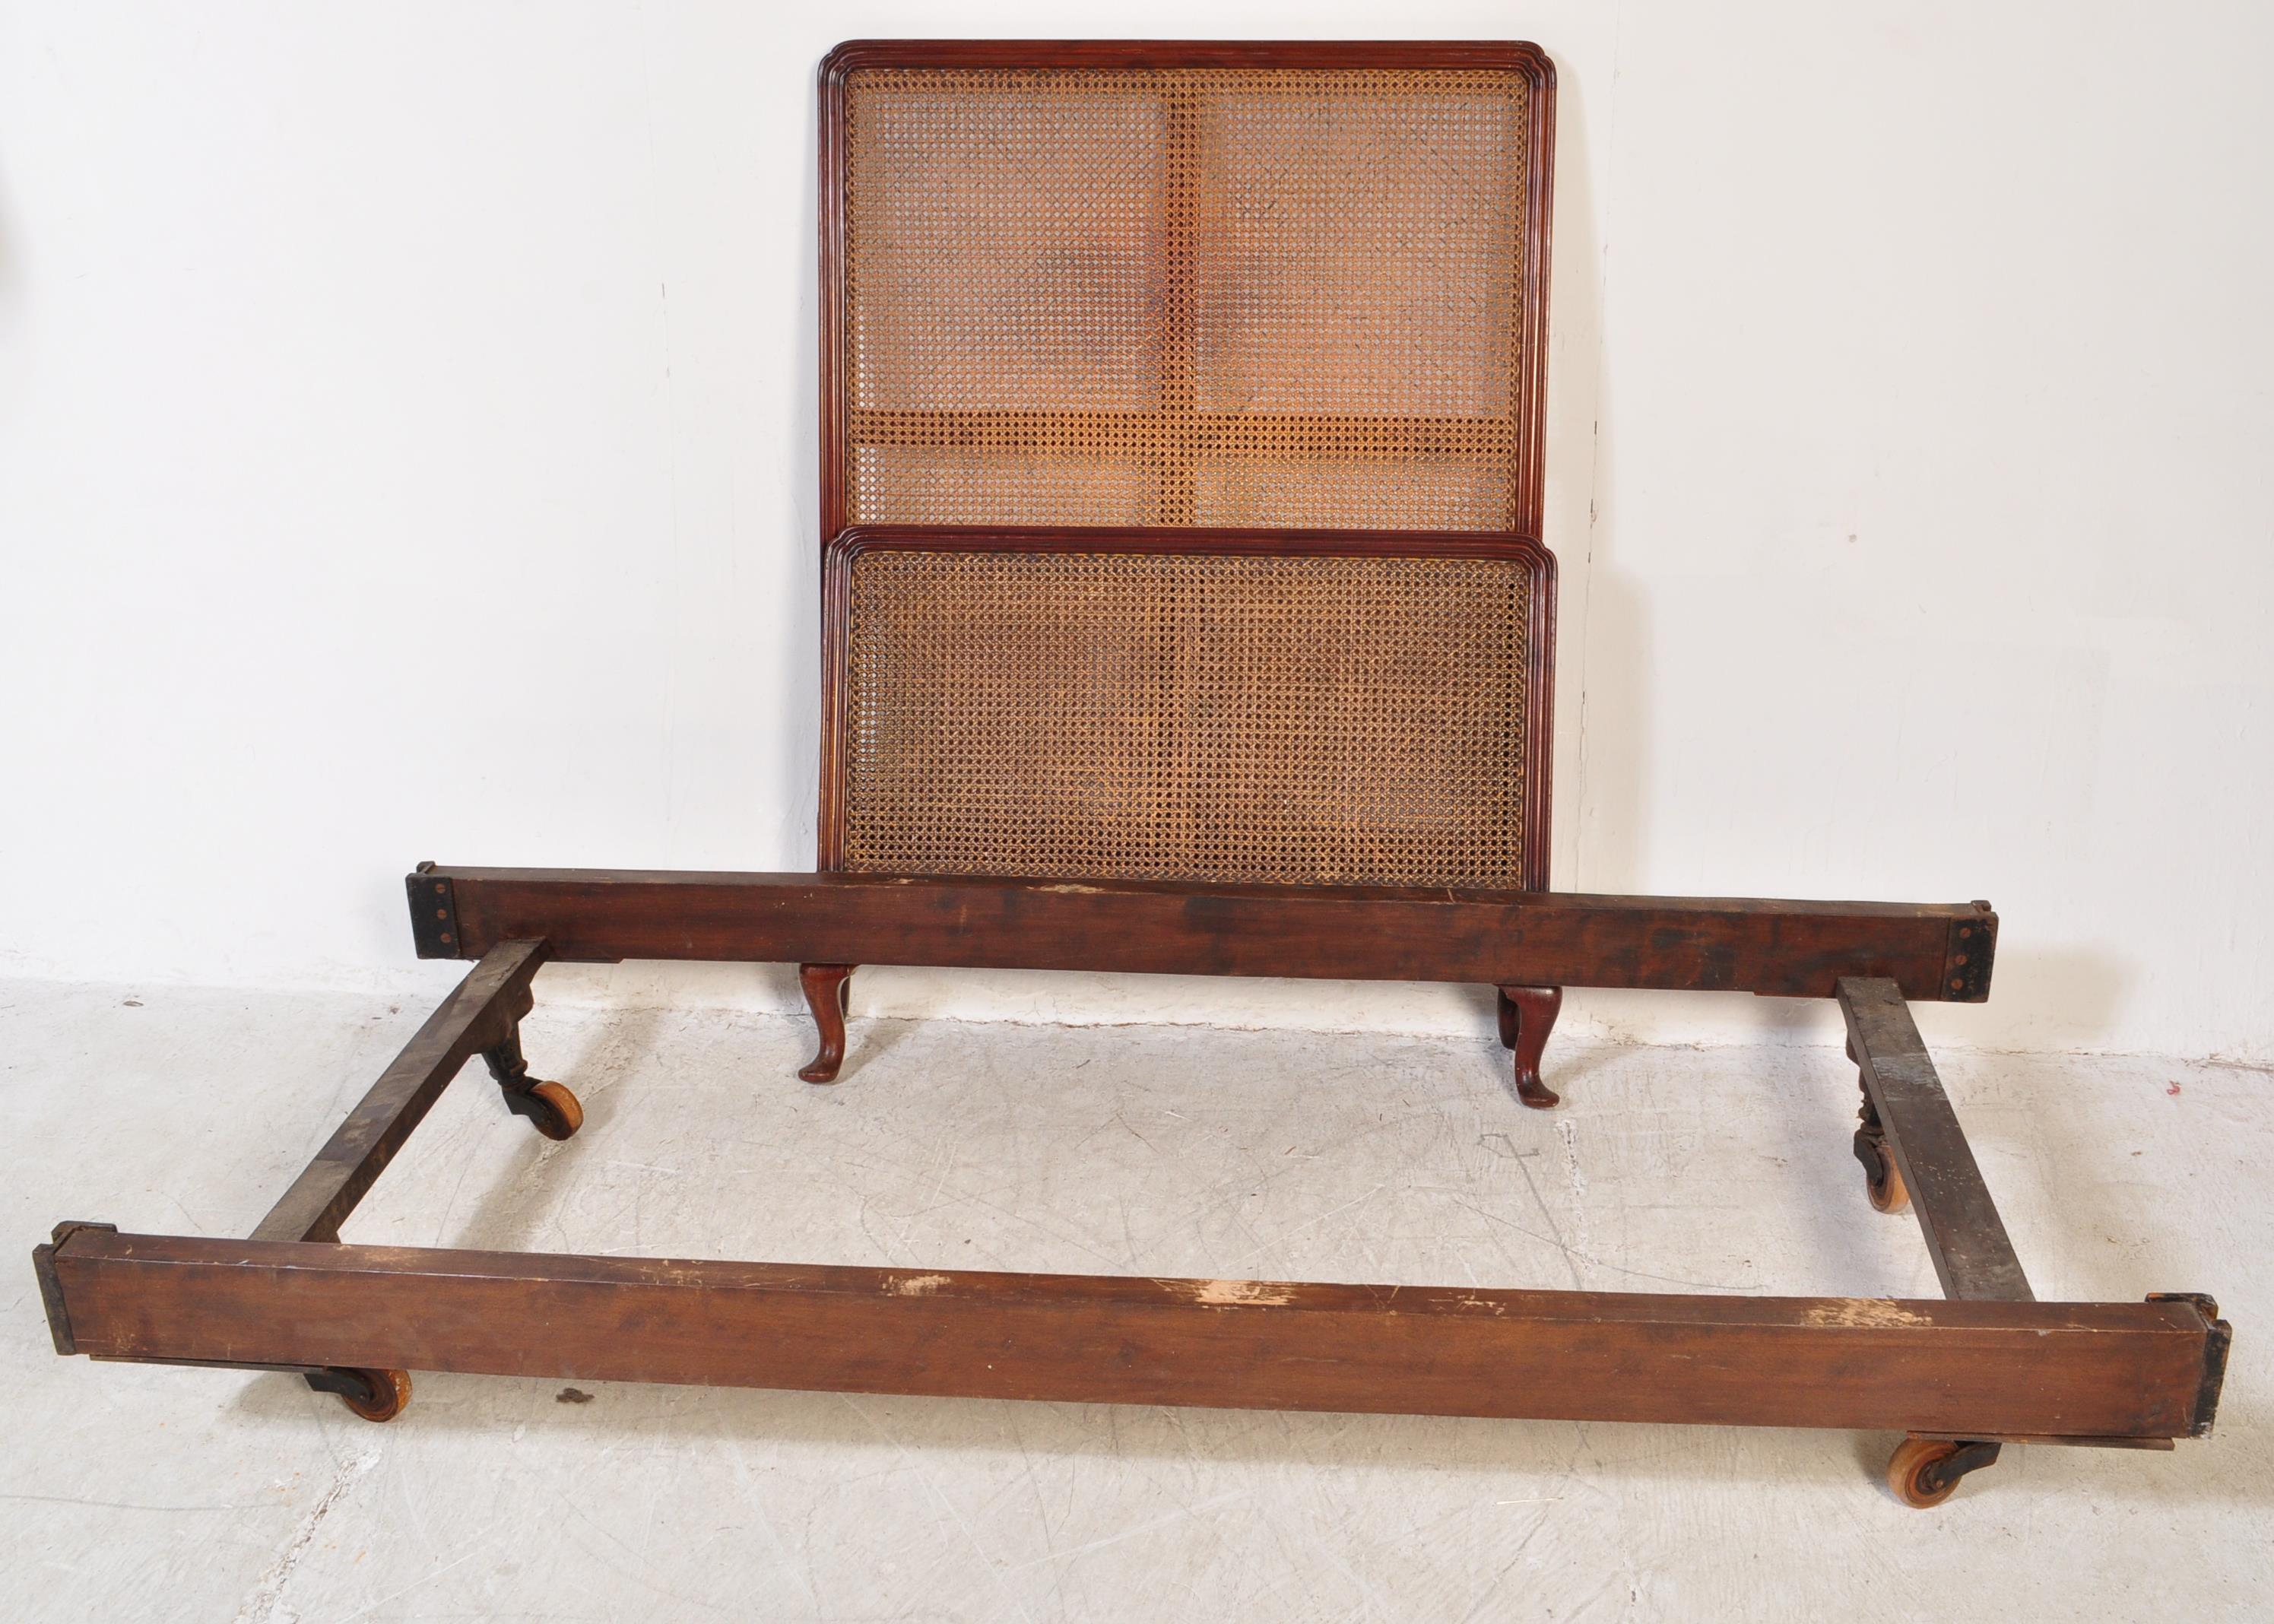 EARLY 20TH CENTURY BERGERE MAHOGANY SINGLE BED FRAME - Image 5 of 5